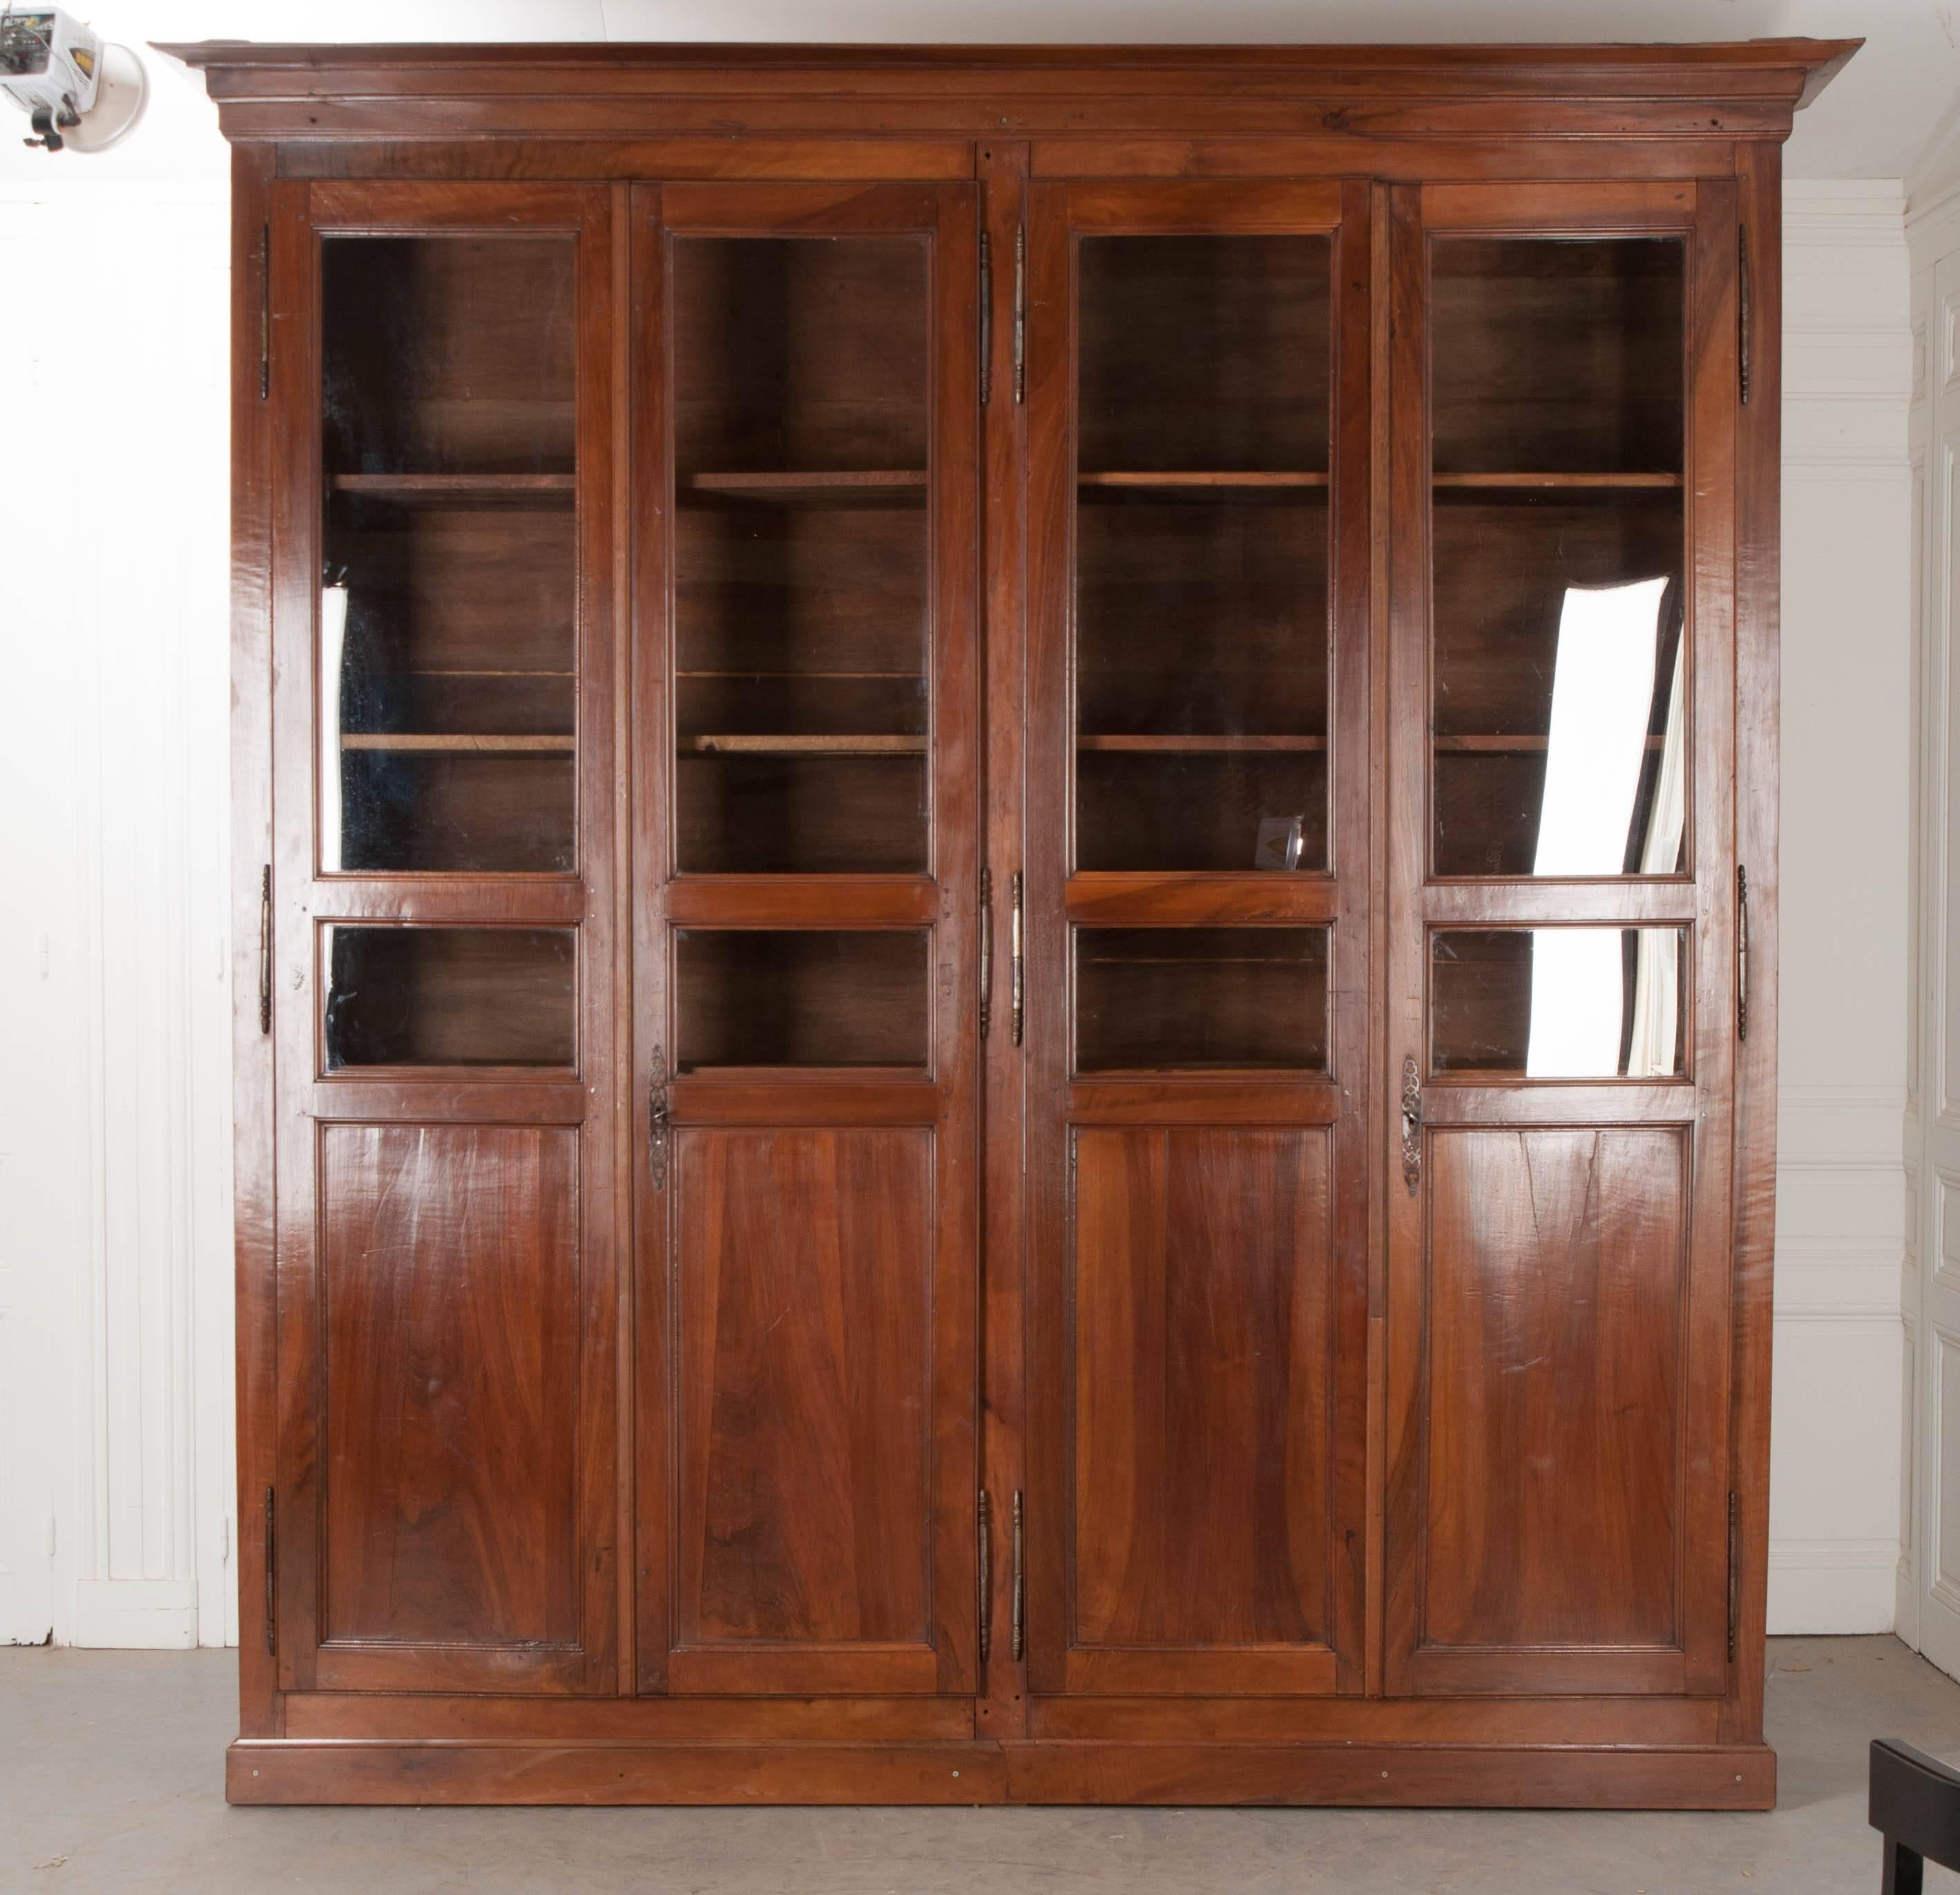 A stunning walnut bibliothèque from 19th century France. The four-door case piece has been made using carefully selected walnut boards, making for a uniform antique with no major color variation. The wood has a rich color and has aged magnificently.